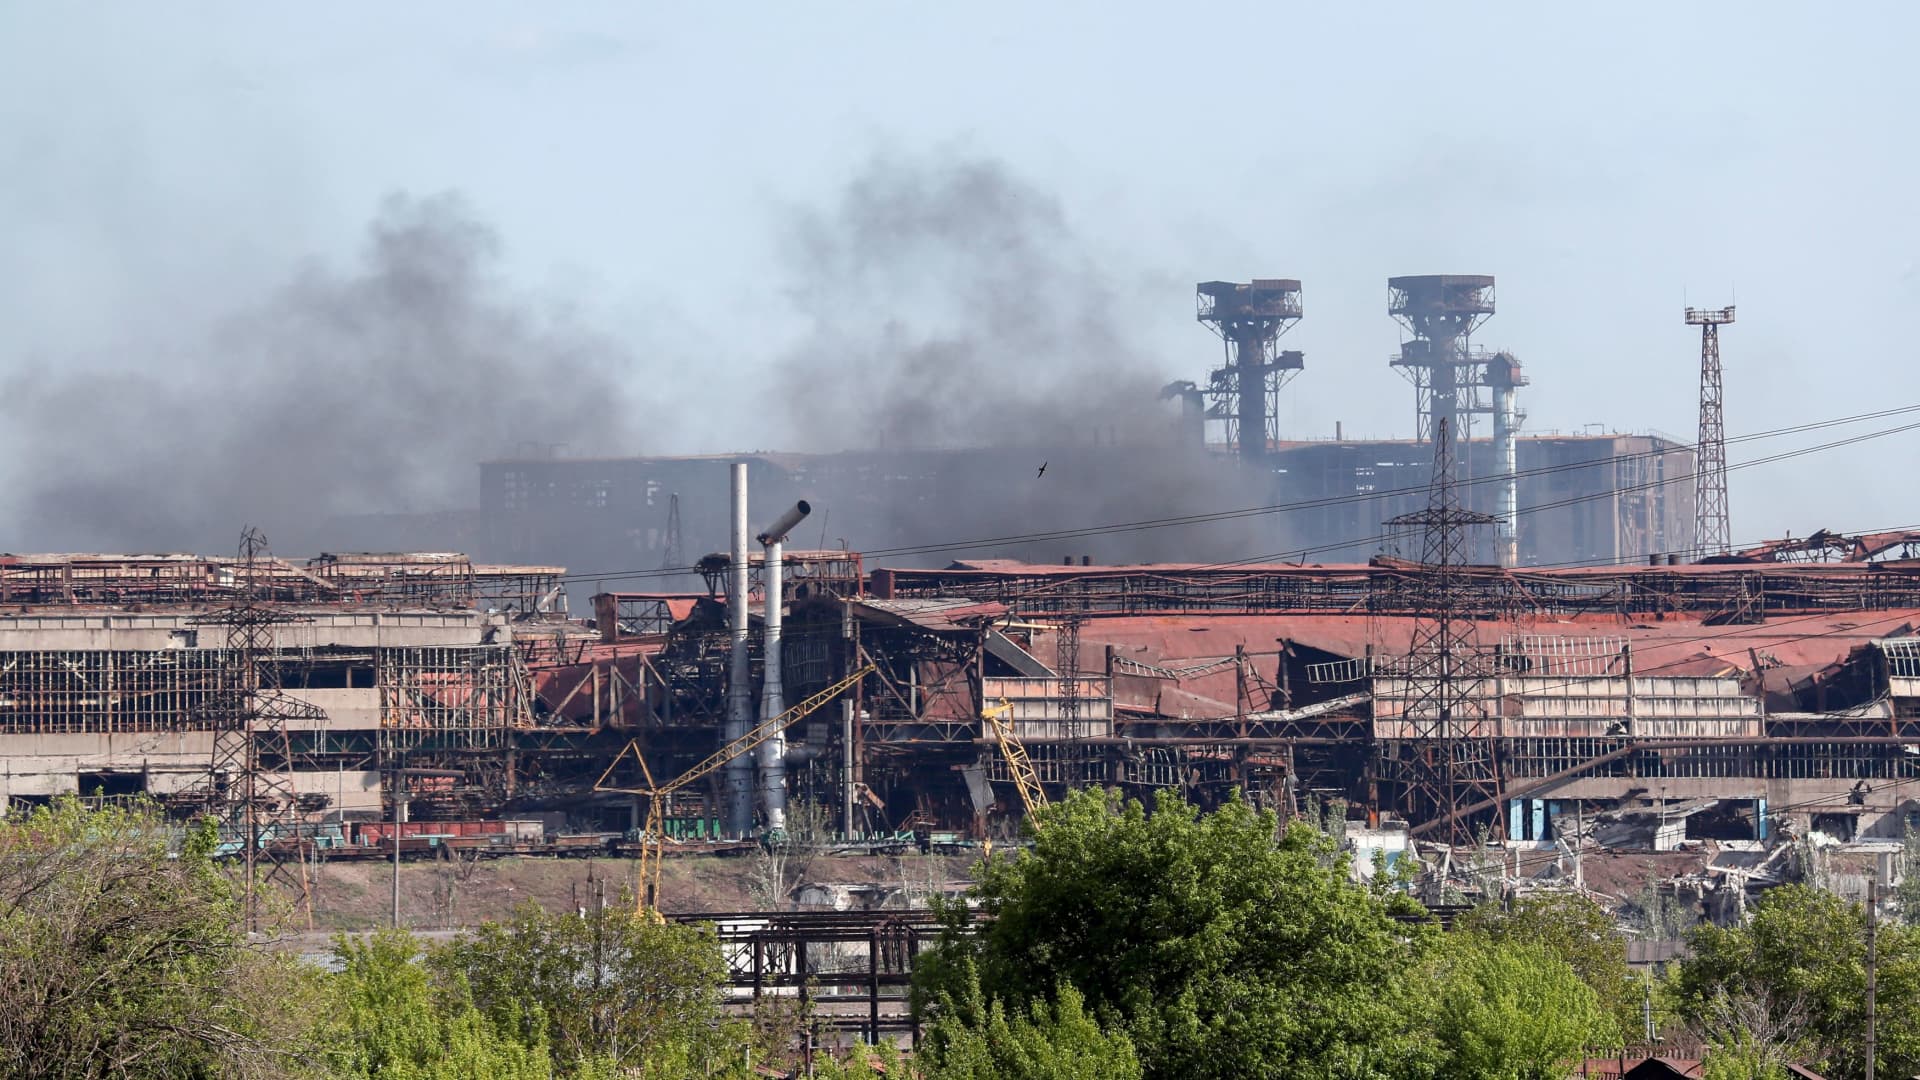 A view shows Azovstal steel mill during Ukraine-Russia conflict in the southern port city of Mariupol, Ukraine May 20, 2022.